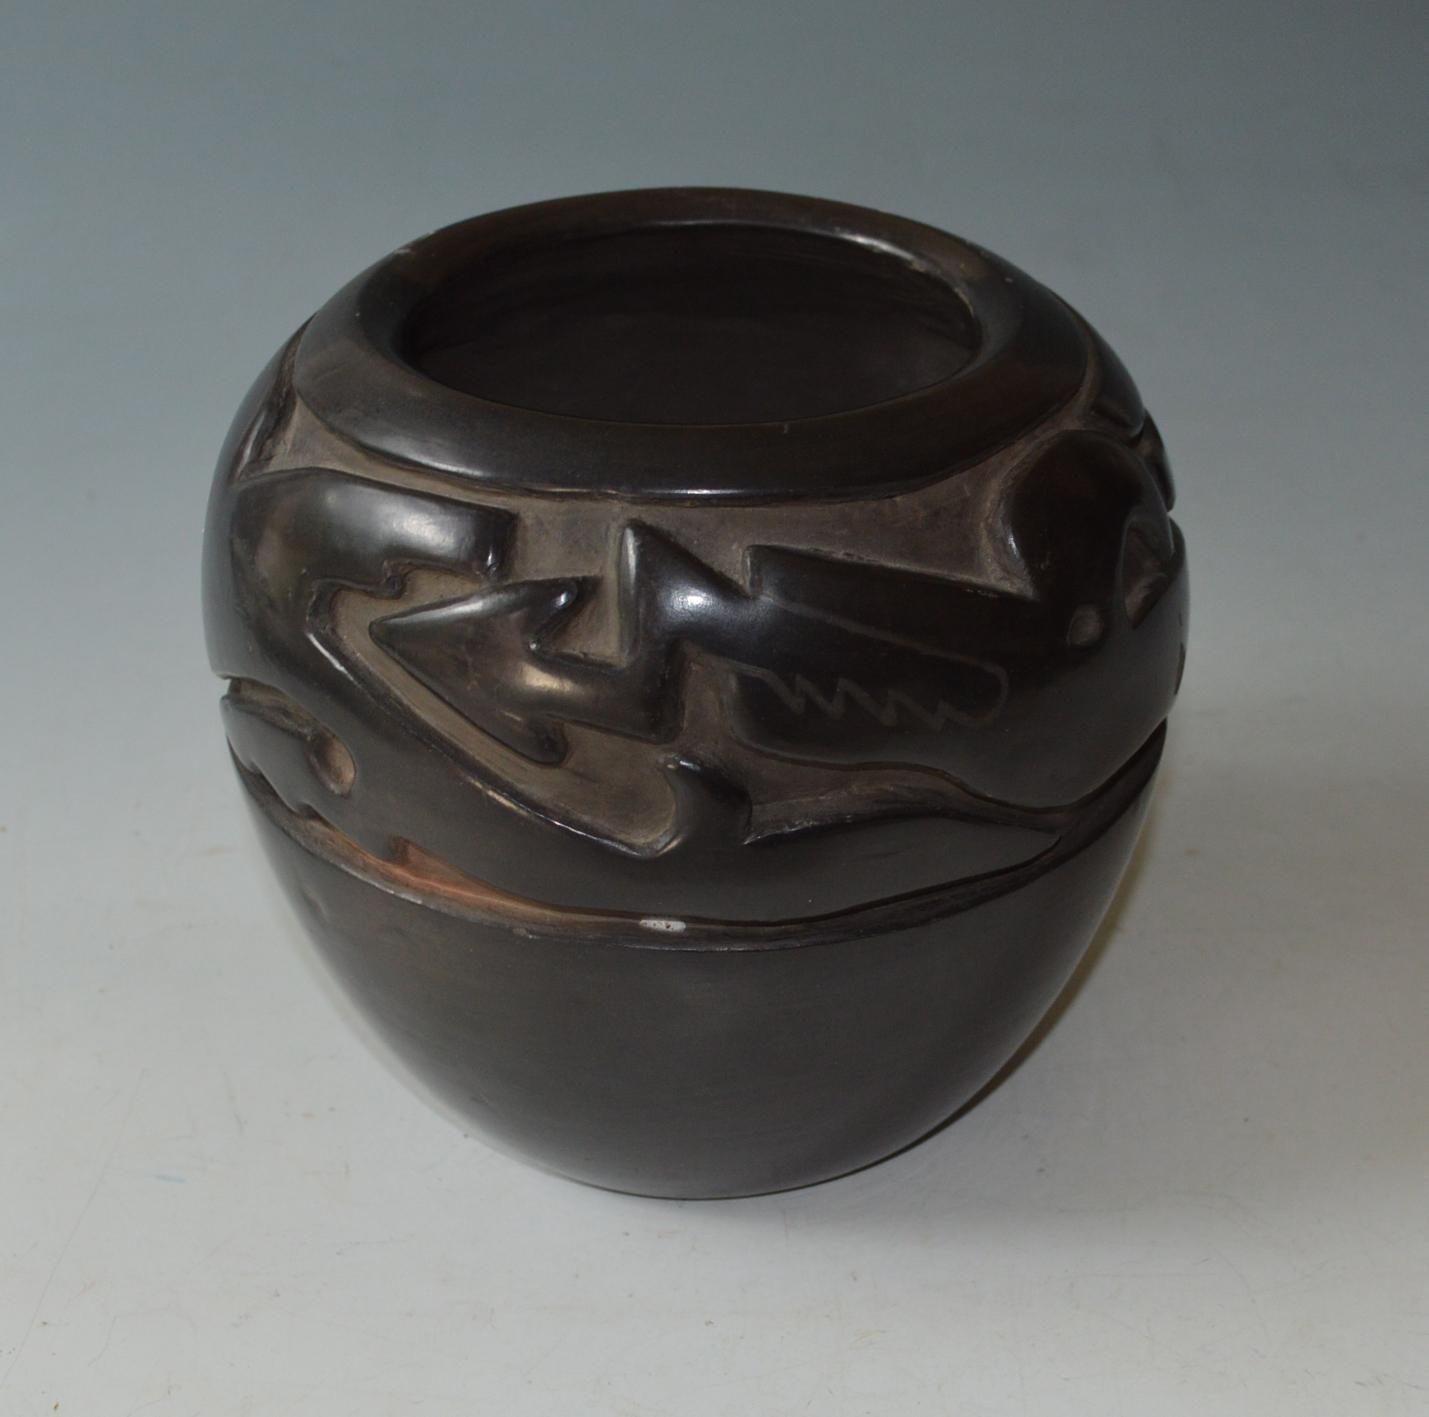 Fine Native American Santa Clara Pottery Jar by  Legoria Tafoya (1911-1984)

Black ware of Ovoid form with encircling Evanya design, very nice design shape and size
Period 1950/60s  signed on base
Condition Good minor wear


 